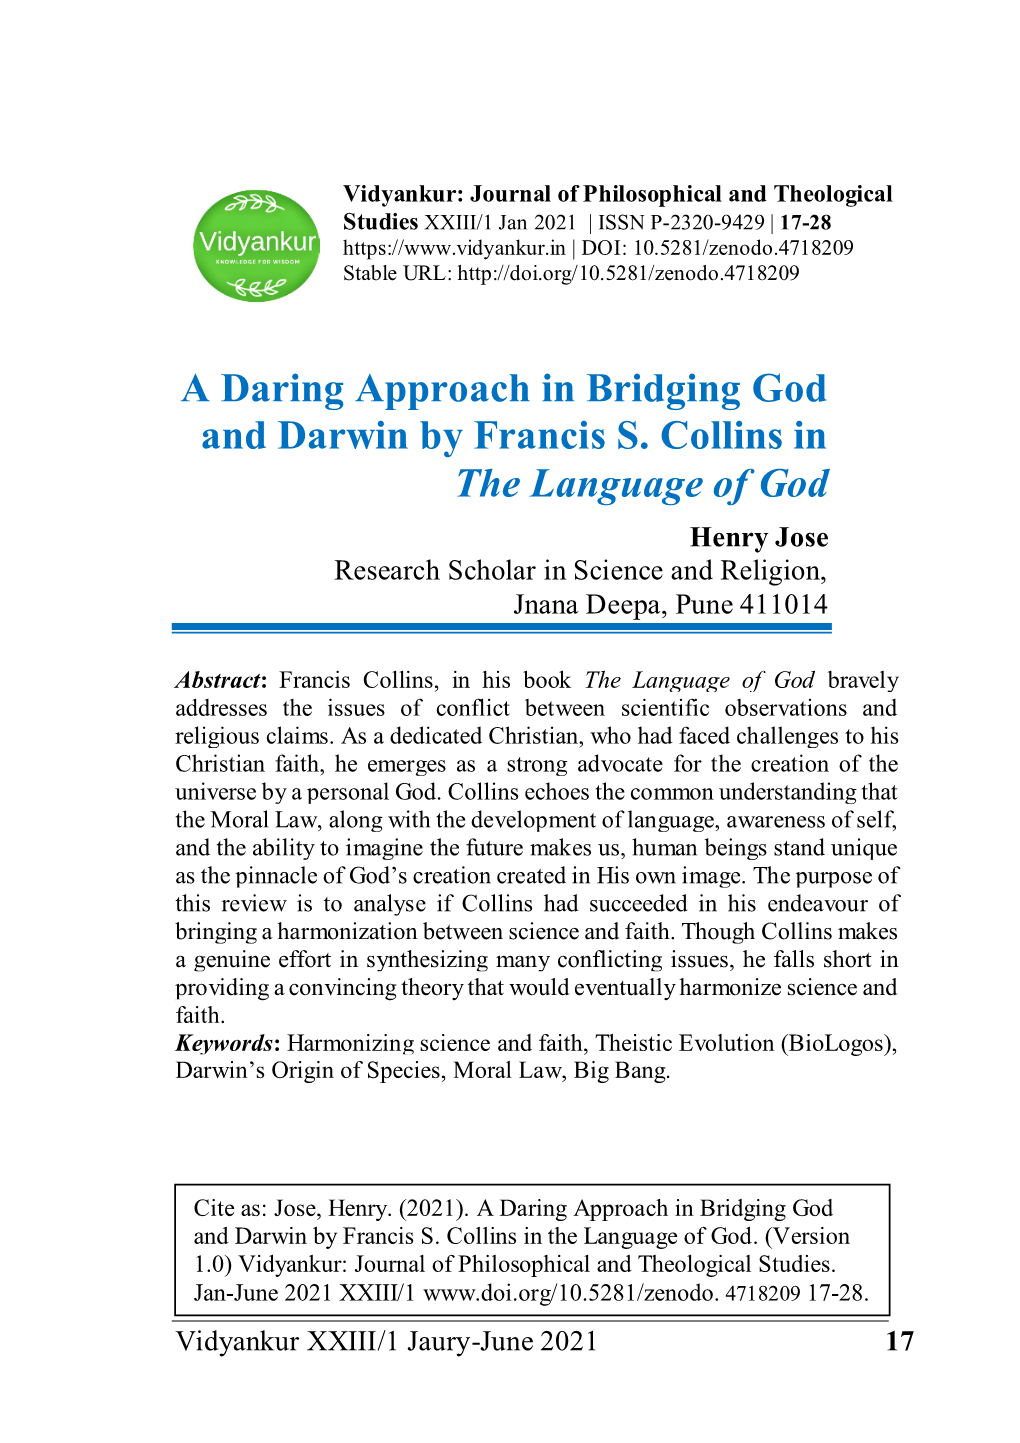 A Daring Approach in Bridging God and Darwin by Francis S. Collins in the Language Of